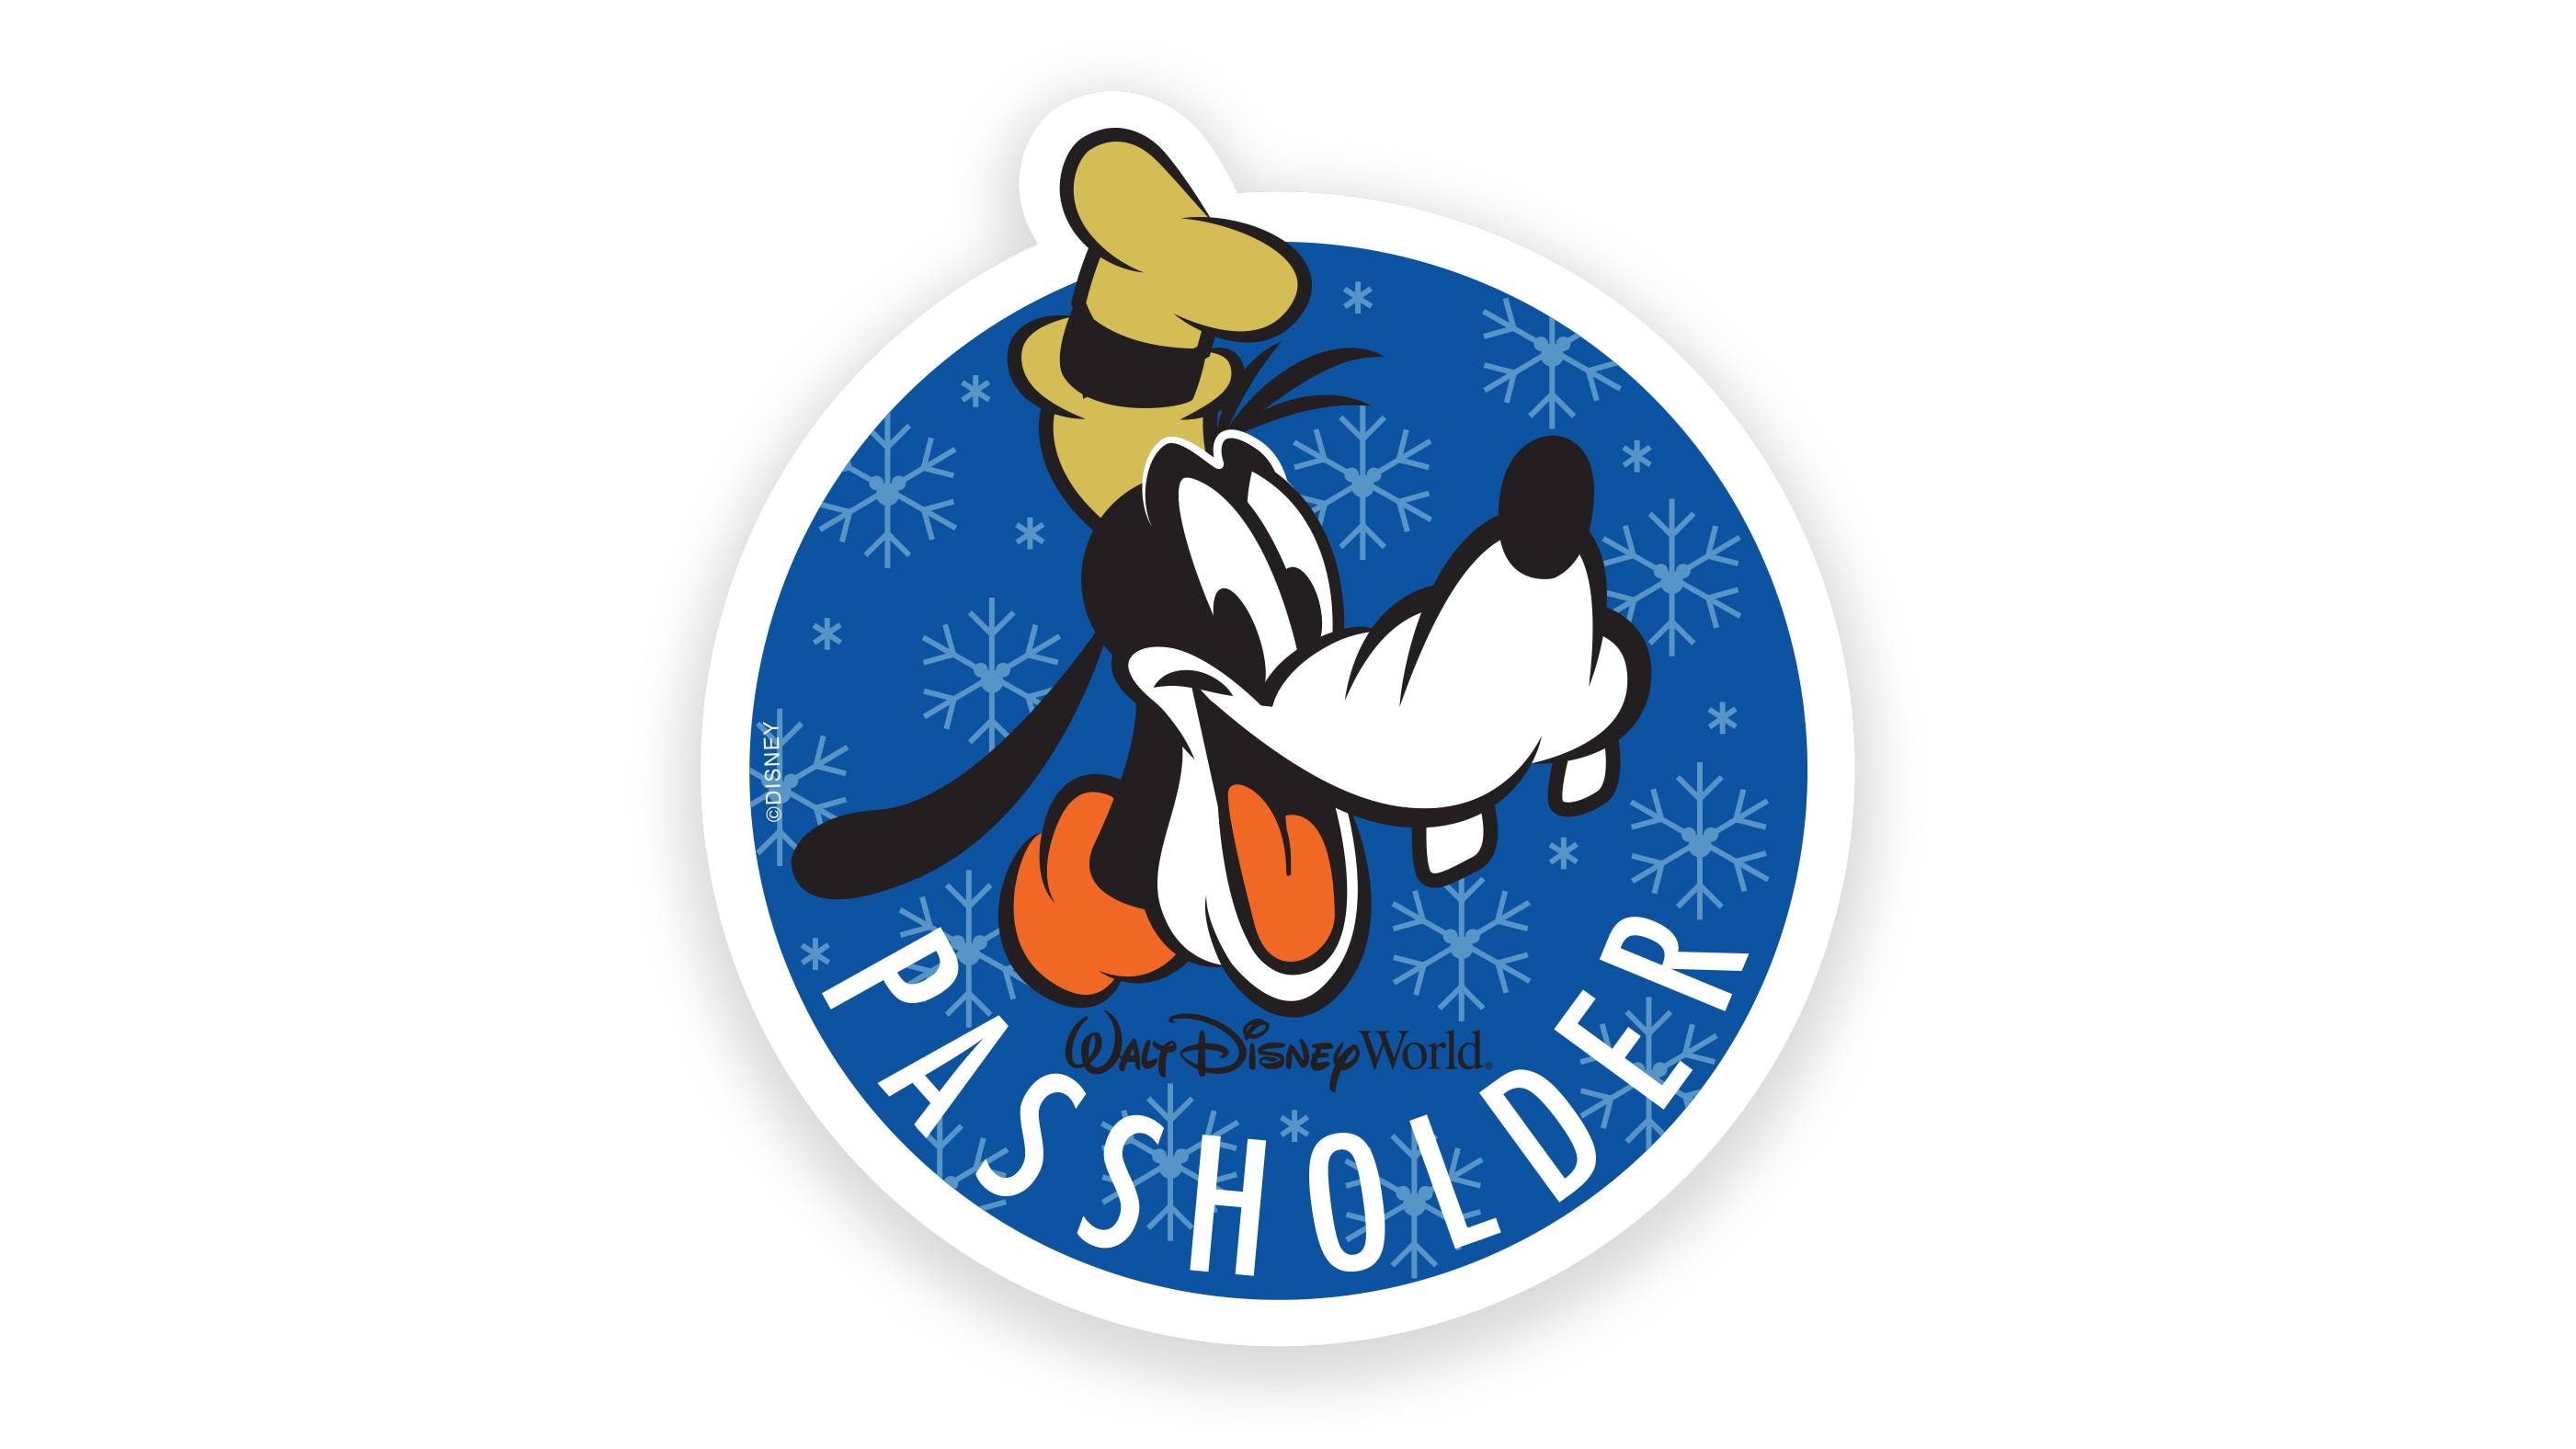 Passholder magnet and other offerings at the 2018 Epcot International Festival of the Holidays